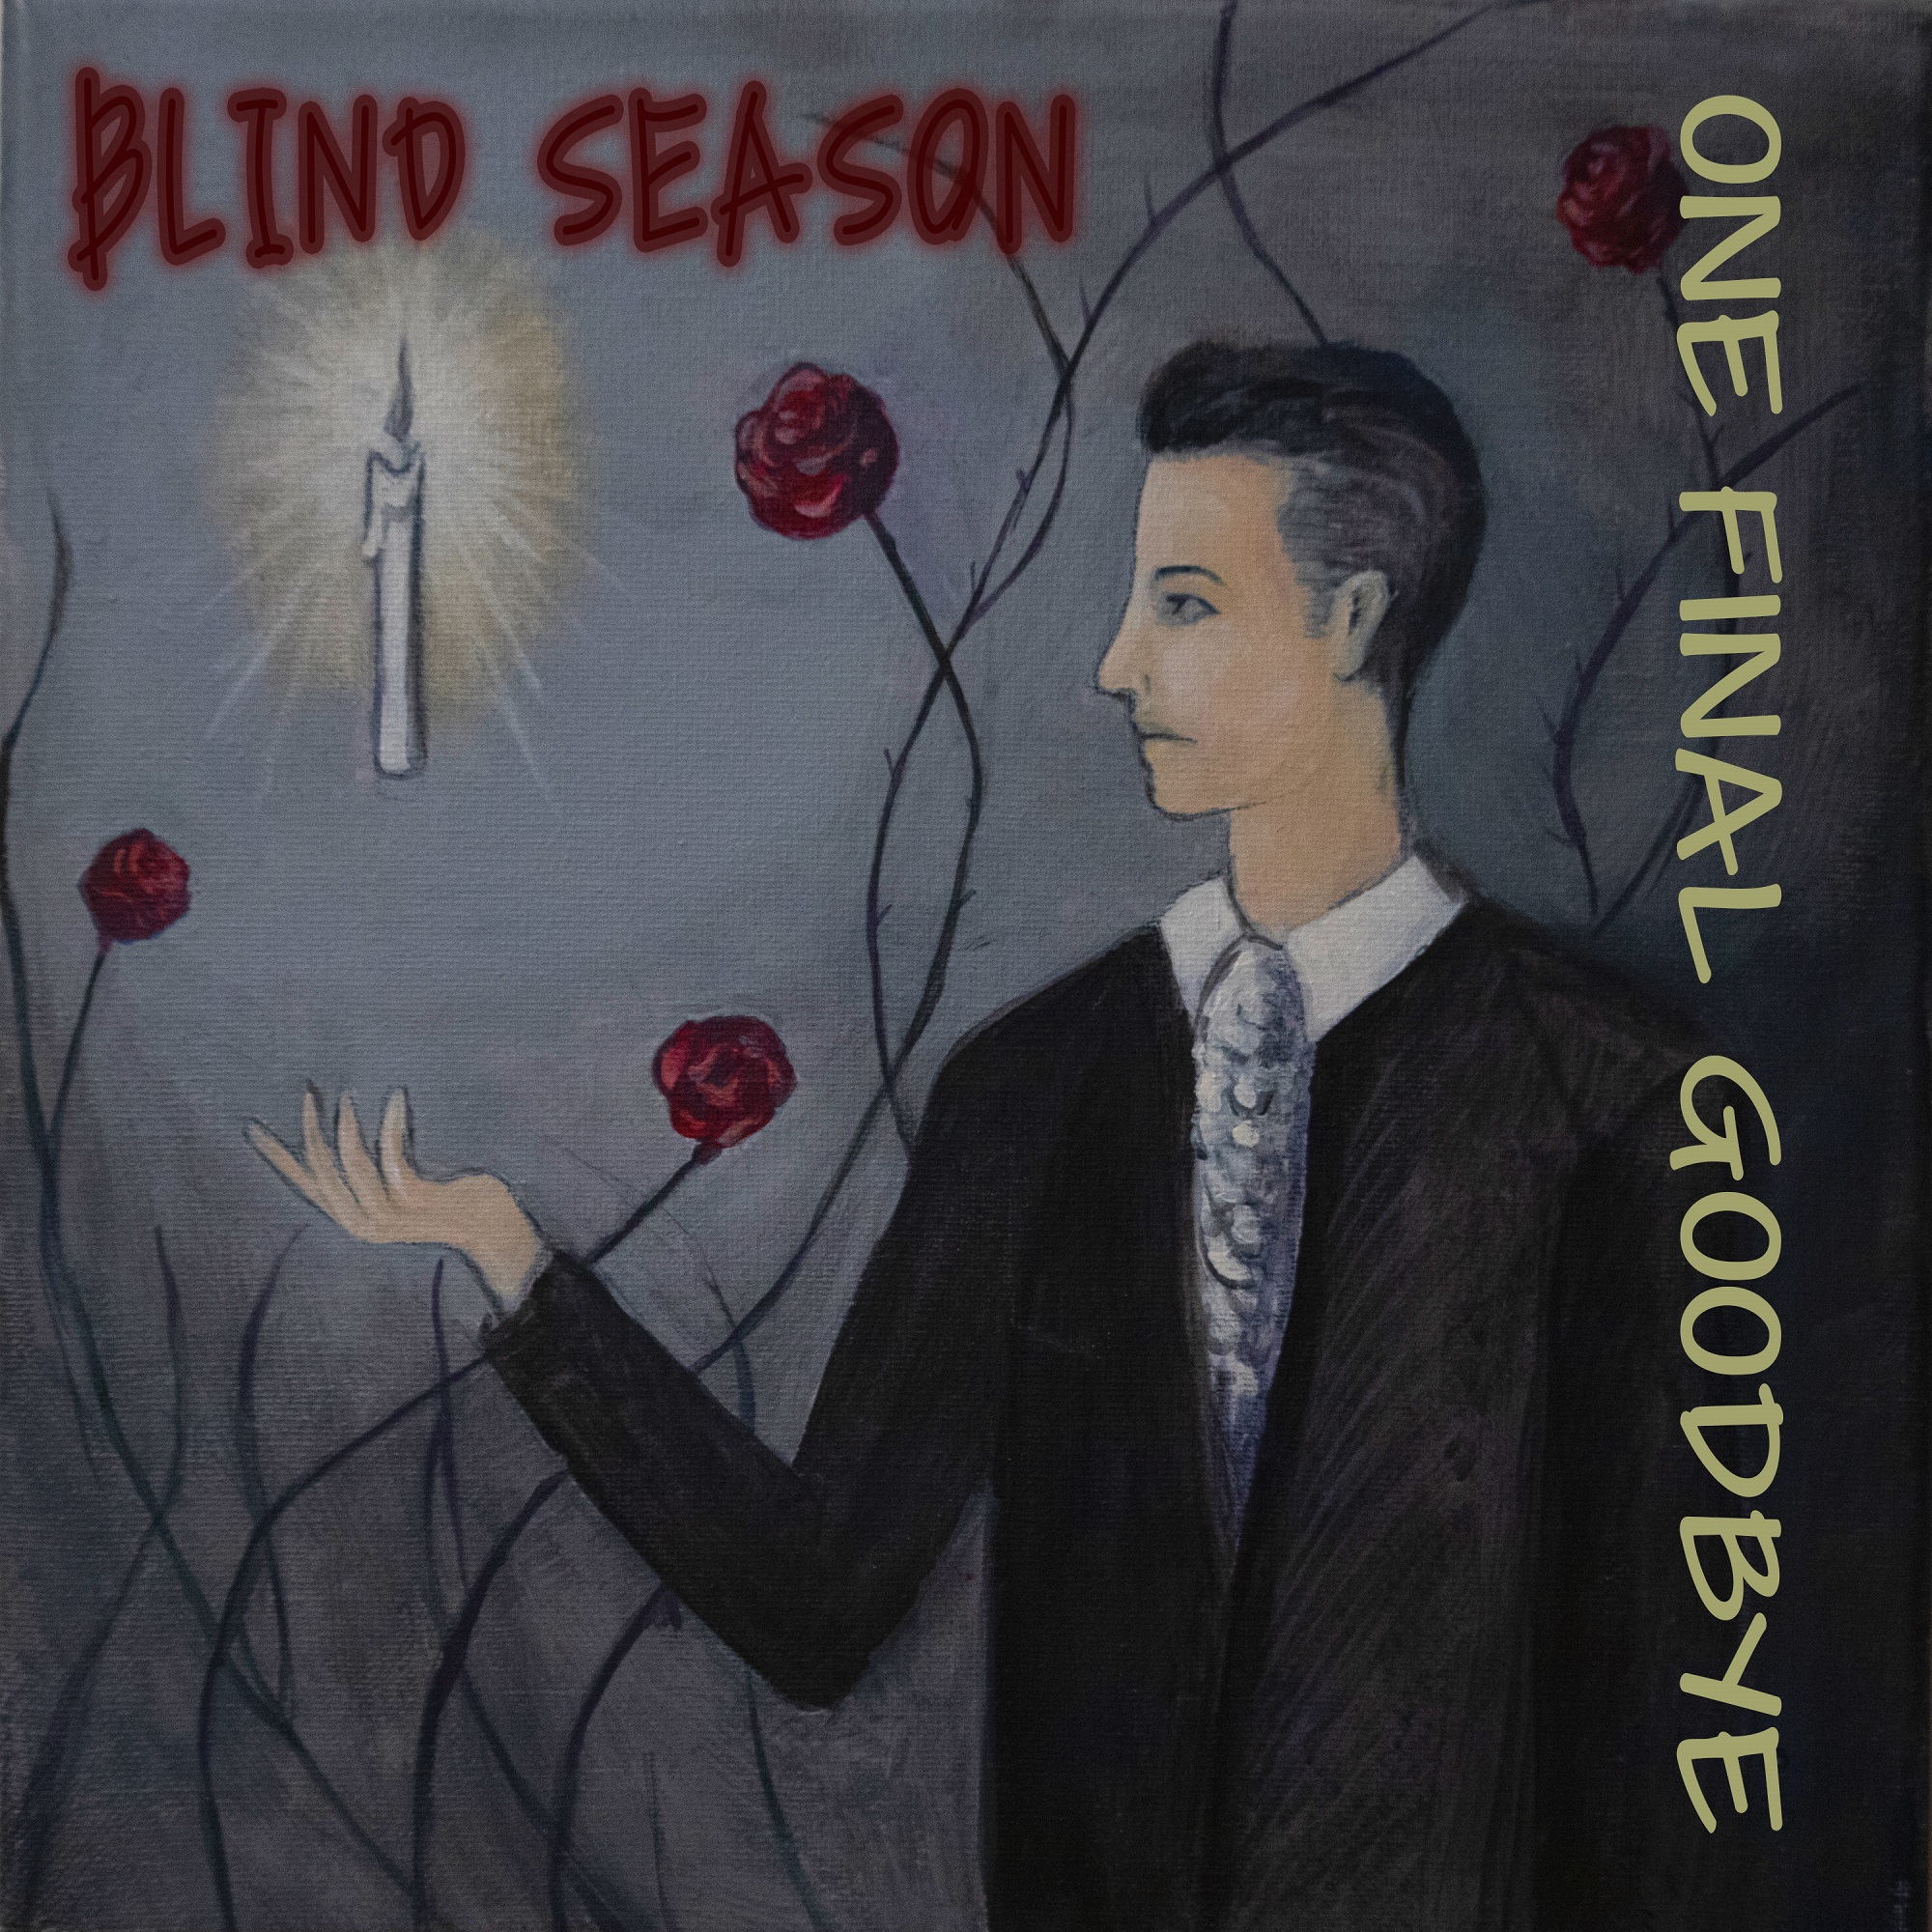 Blind Season breathes life into a new era of music with new single ‘One Final Goodbye’